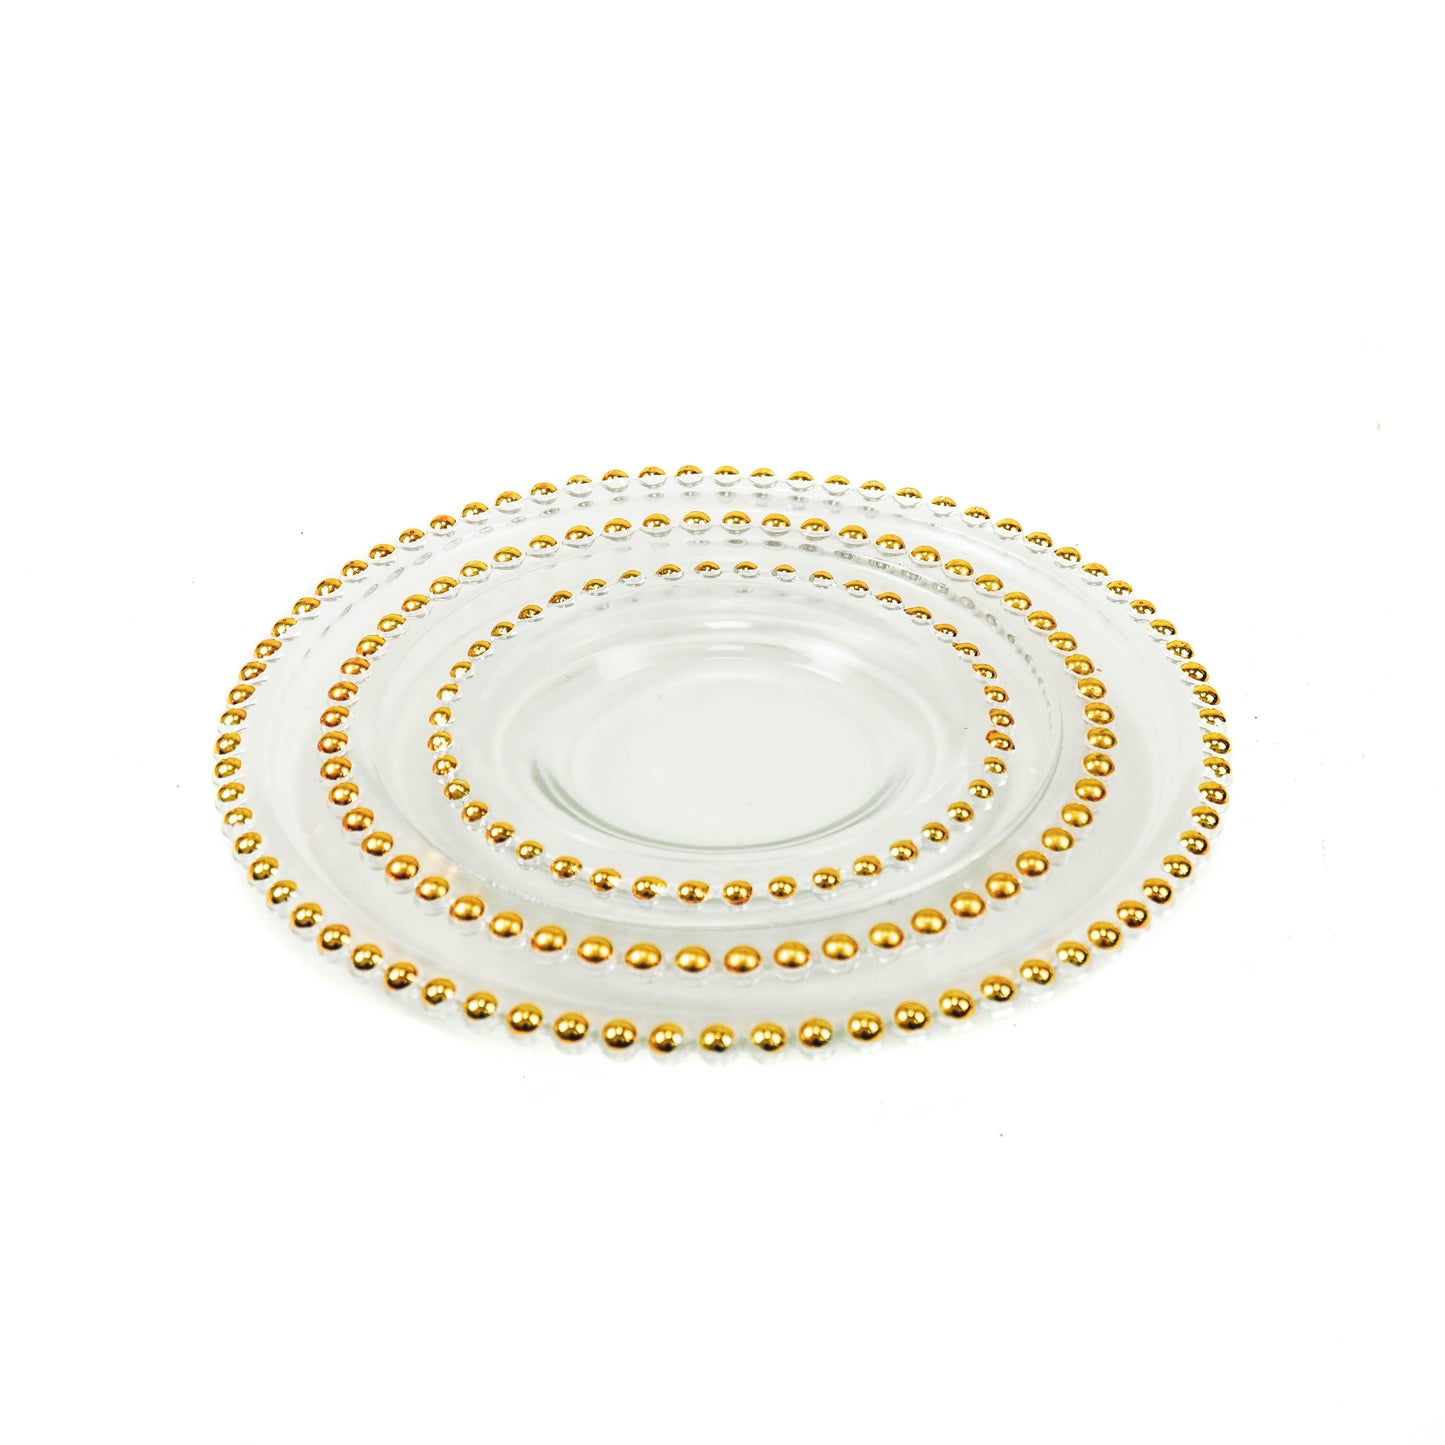 HV Dinnerplate of glass with golden rim -  21.5x2 cm